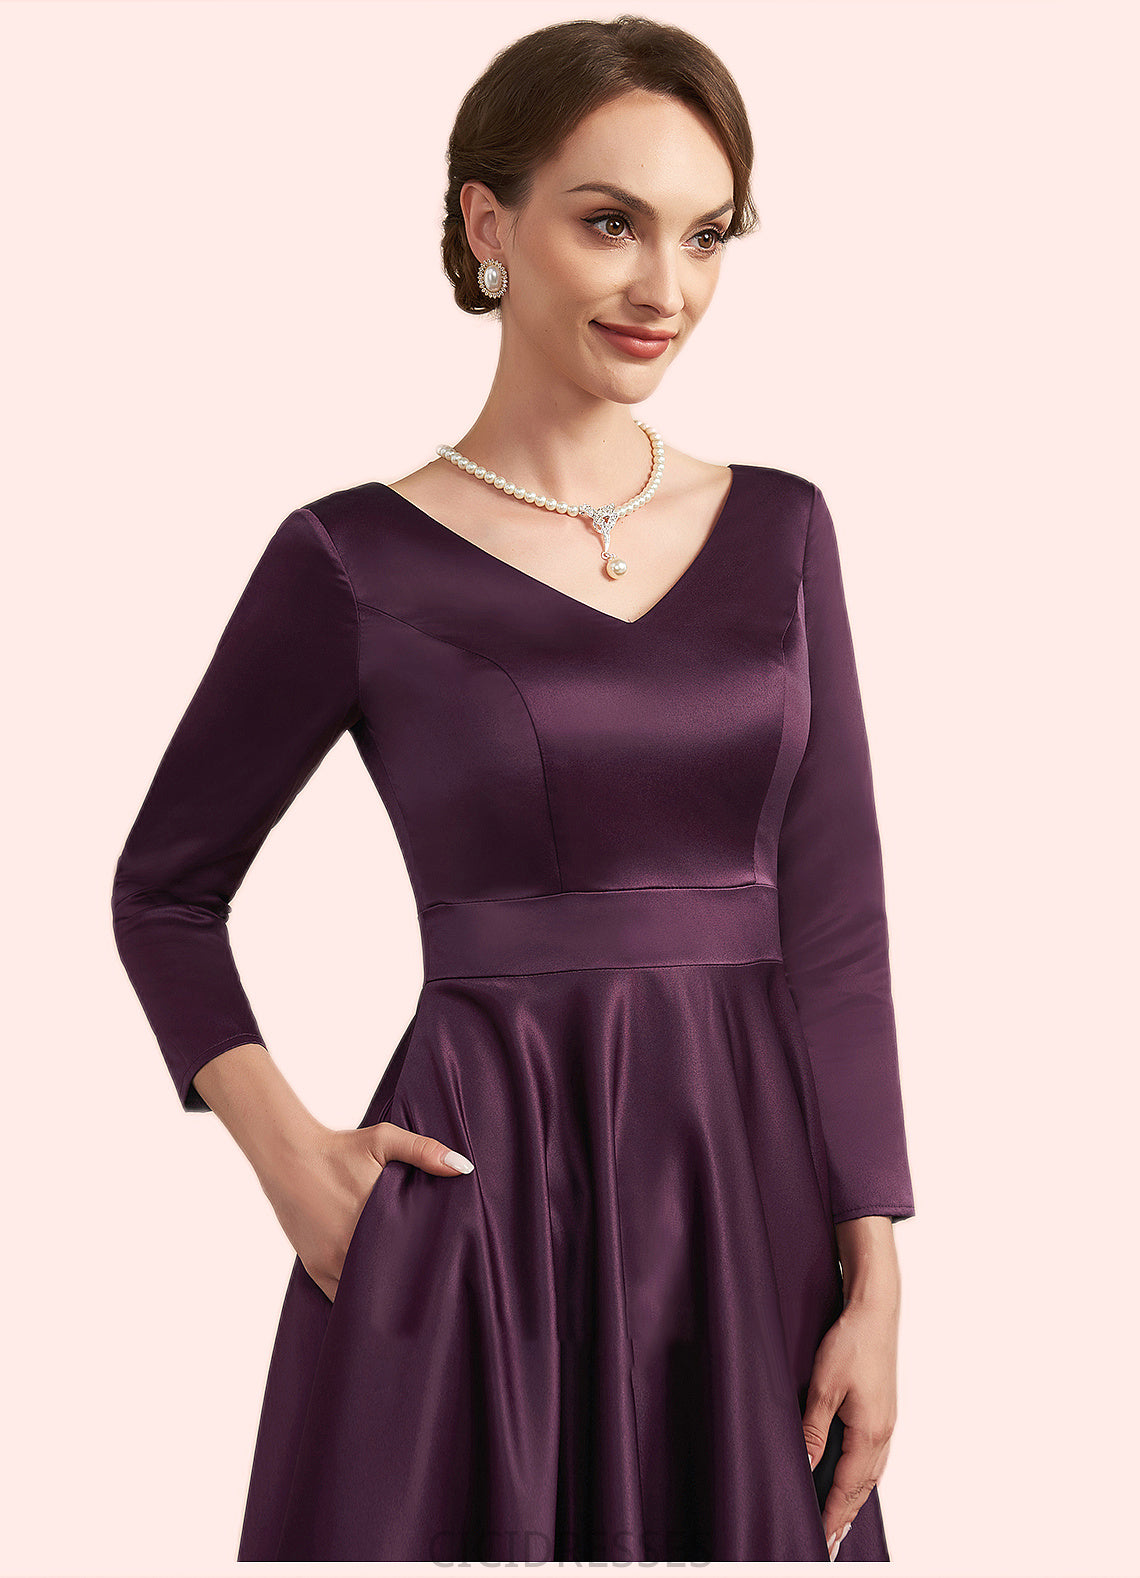 Noelle A-Line V-neck Ankle-Length Satin Mother of the Bride Dress With Pockets CIC8126P0014720